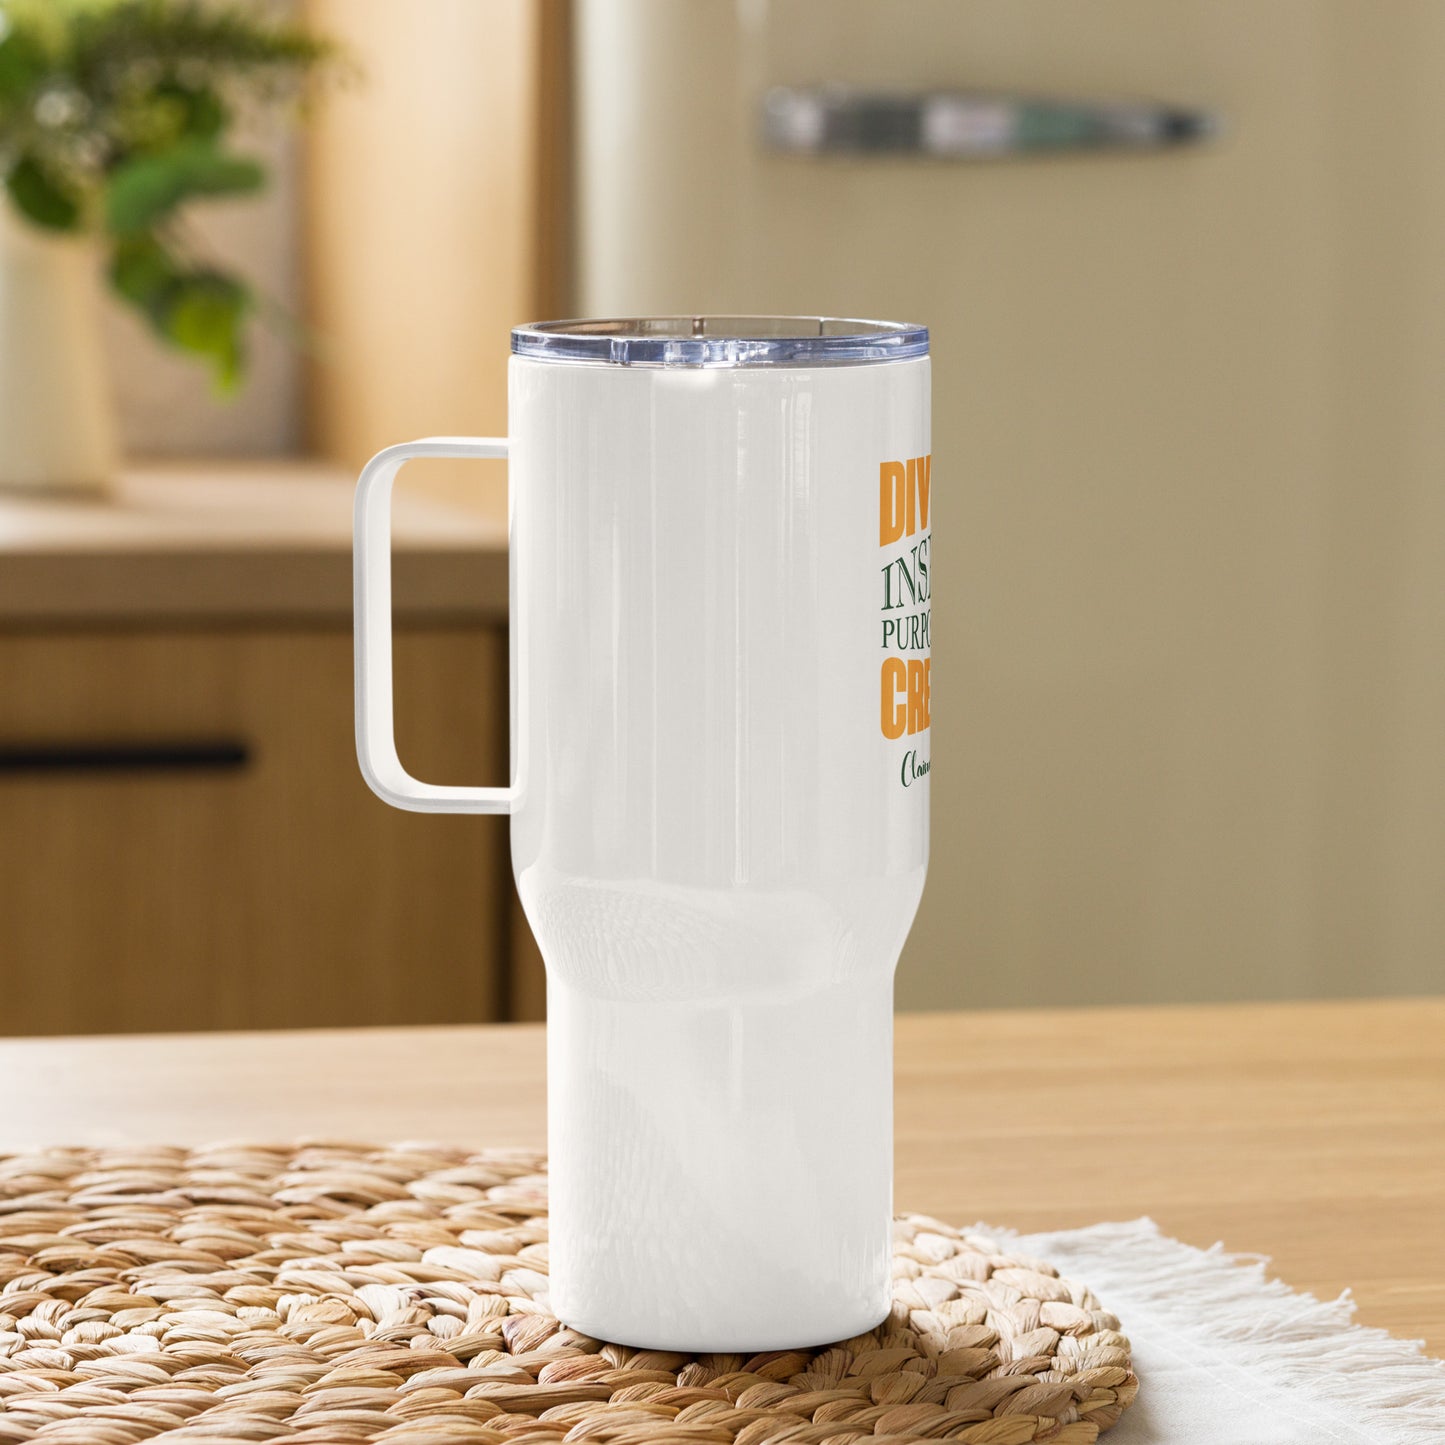 Divinely Inspired Purposefully Created Christian Travel mug with a handle